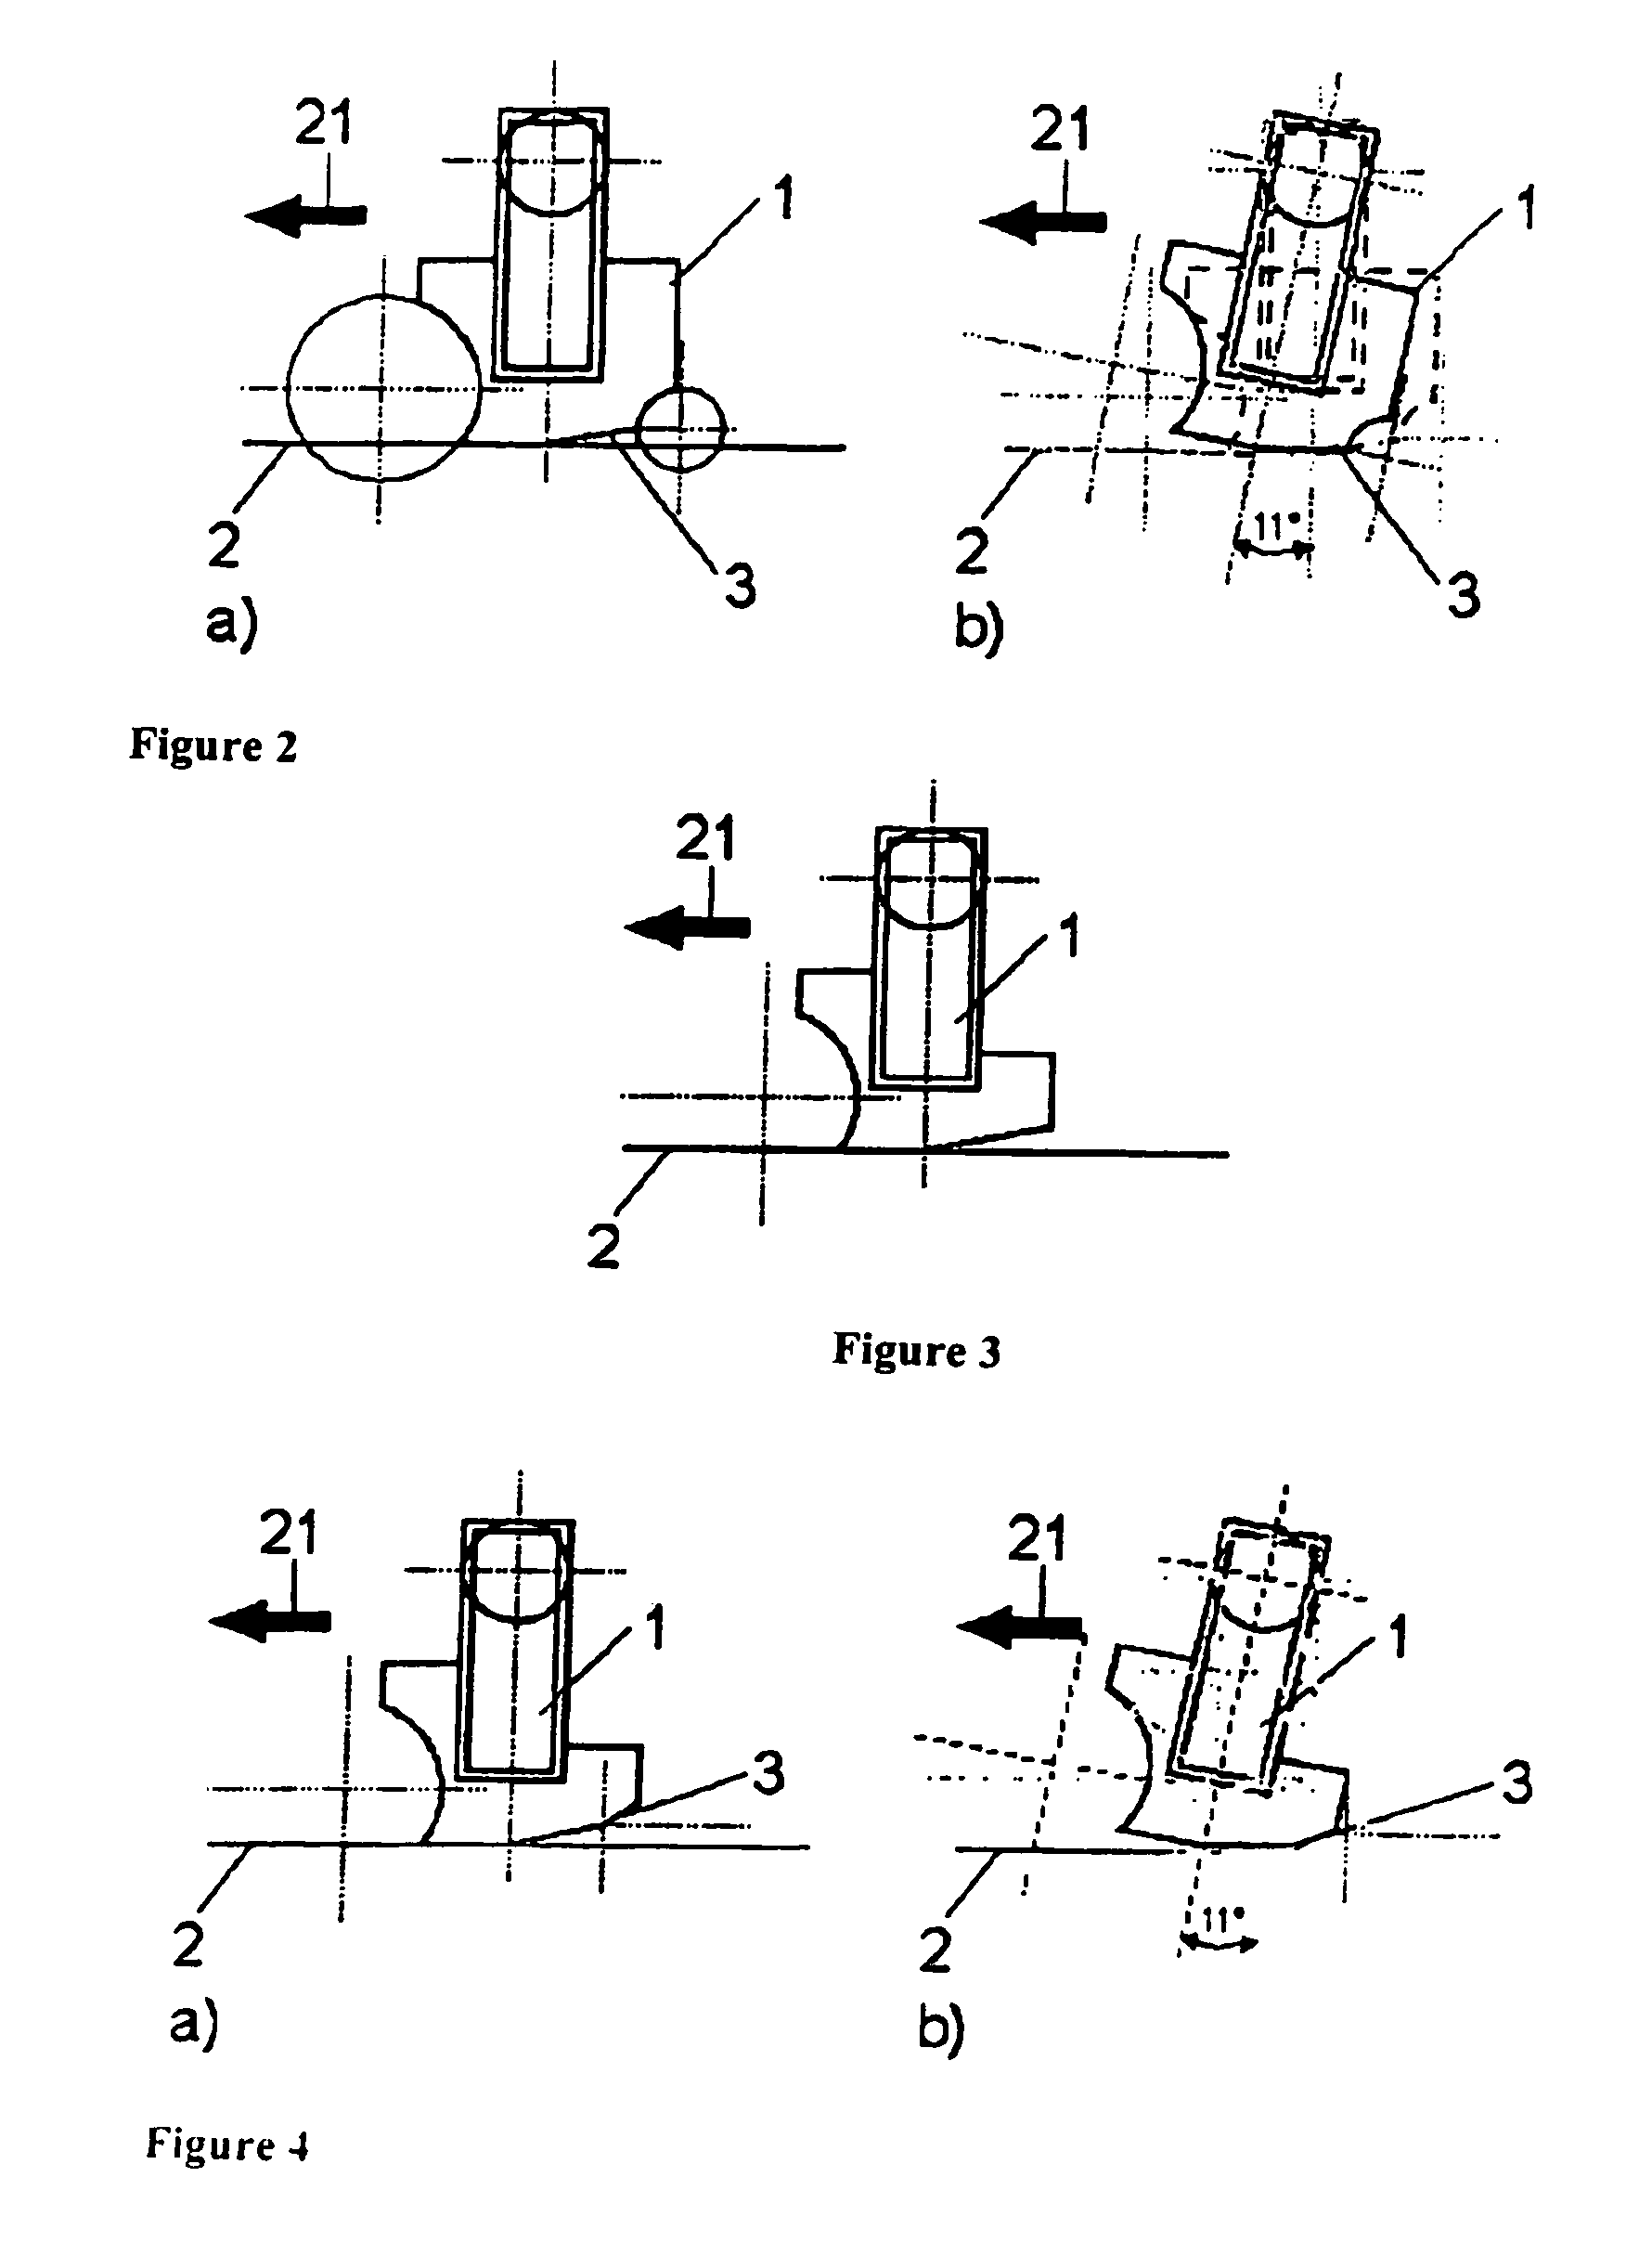 Method and device for applying fluids